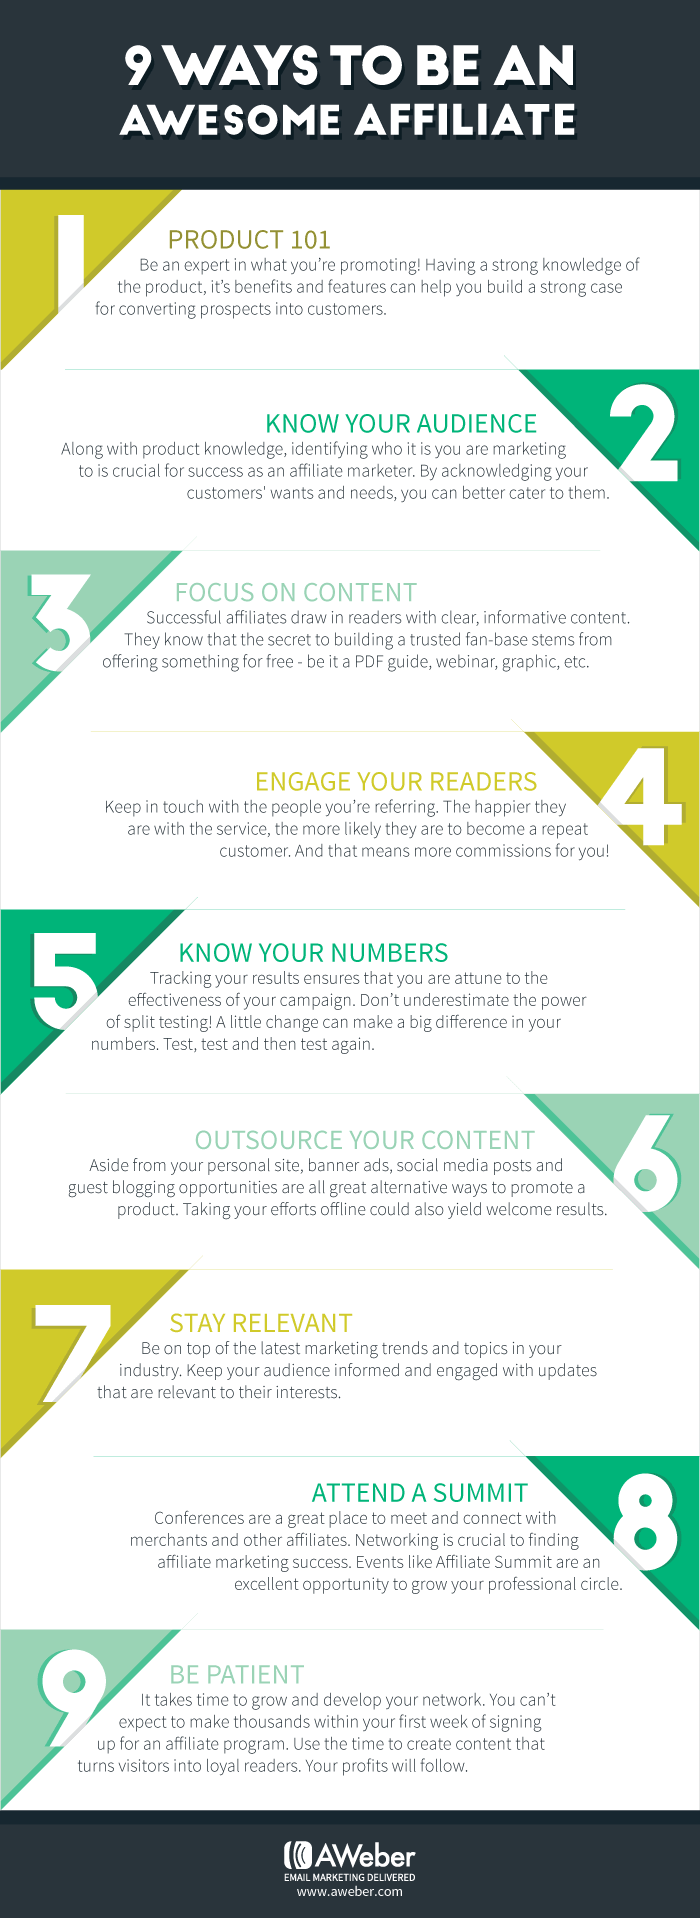 9-ways-to-be-an-awesome-affiliate